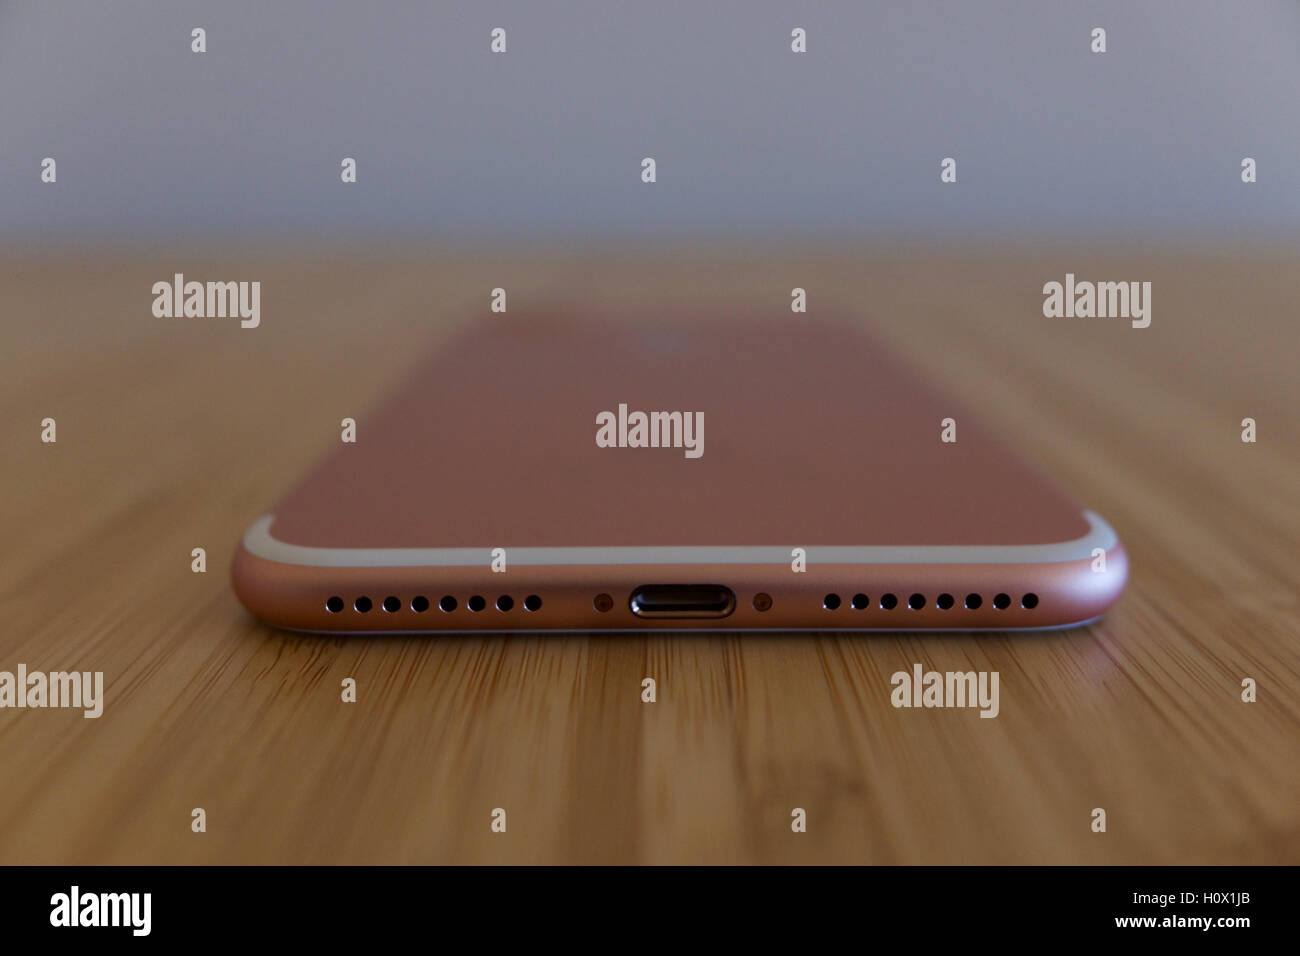 View of  iPhone 7 Plus Rose Gold. The iPhone 7 Plus is new smartphone produced by Apple Computer, Inc. Stock Photo